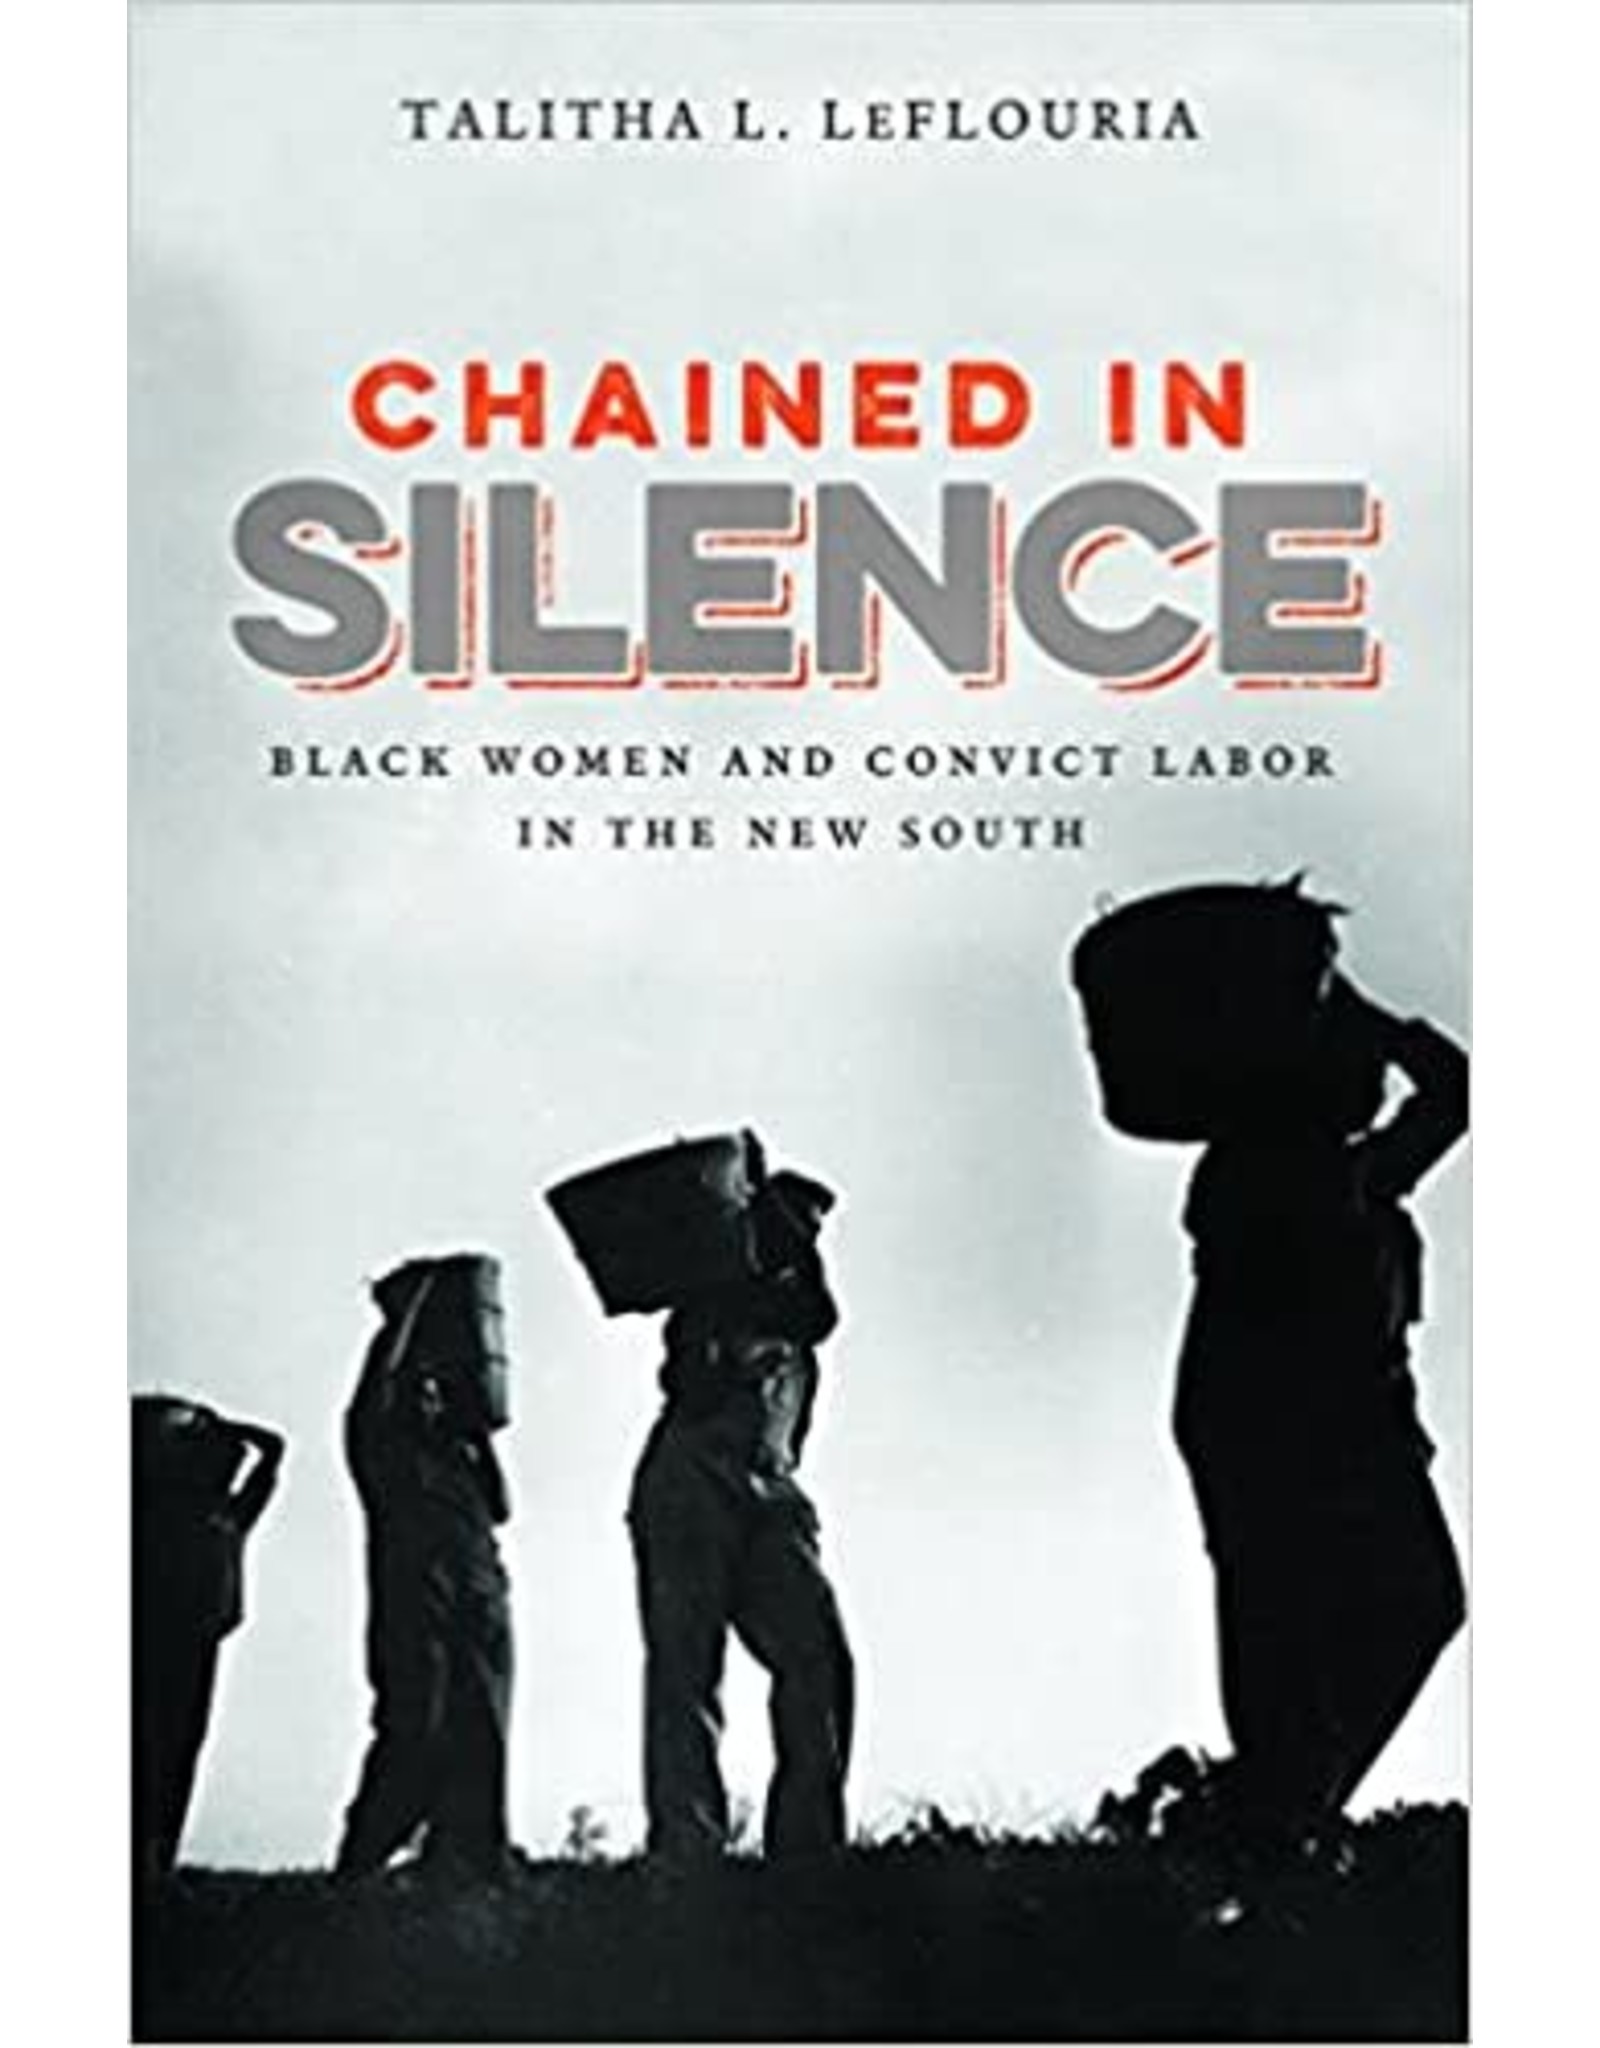 Non-Fiction: Jim Crow Era Chained in Silence